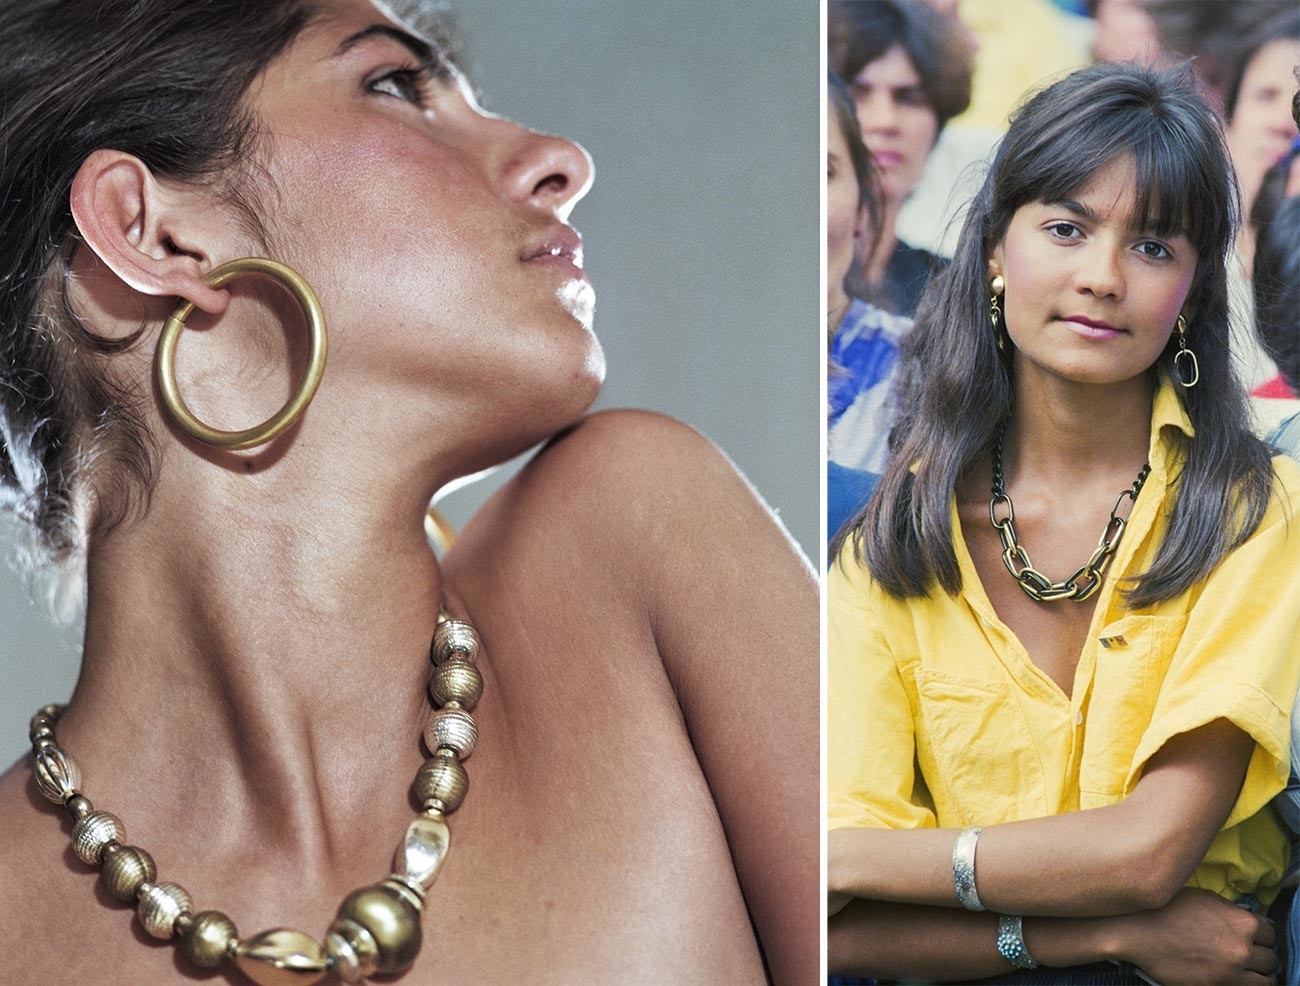 Left: Plastic jewelry made in Georgia. Right: A lady attends a public event in Kizhinev, Moldova.

